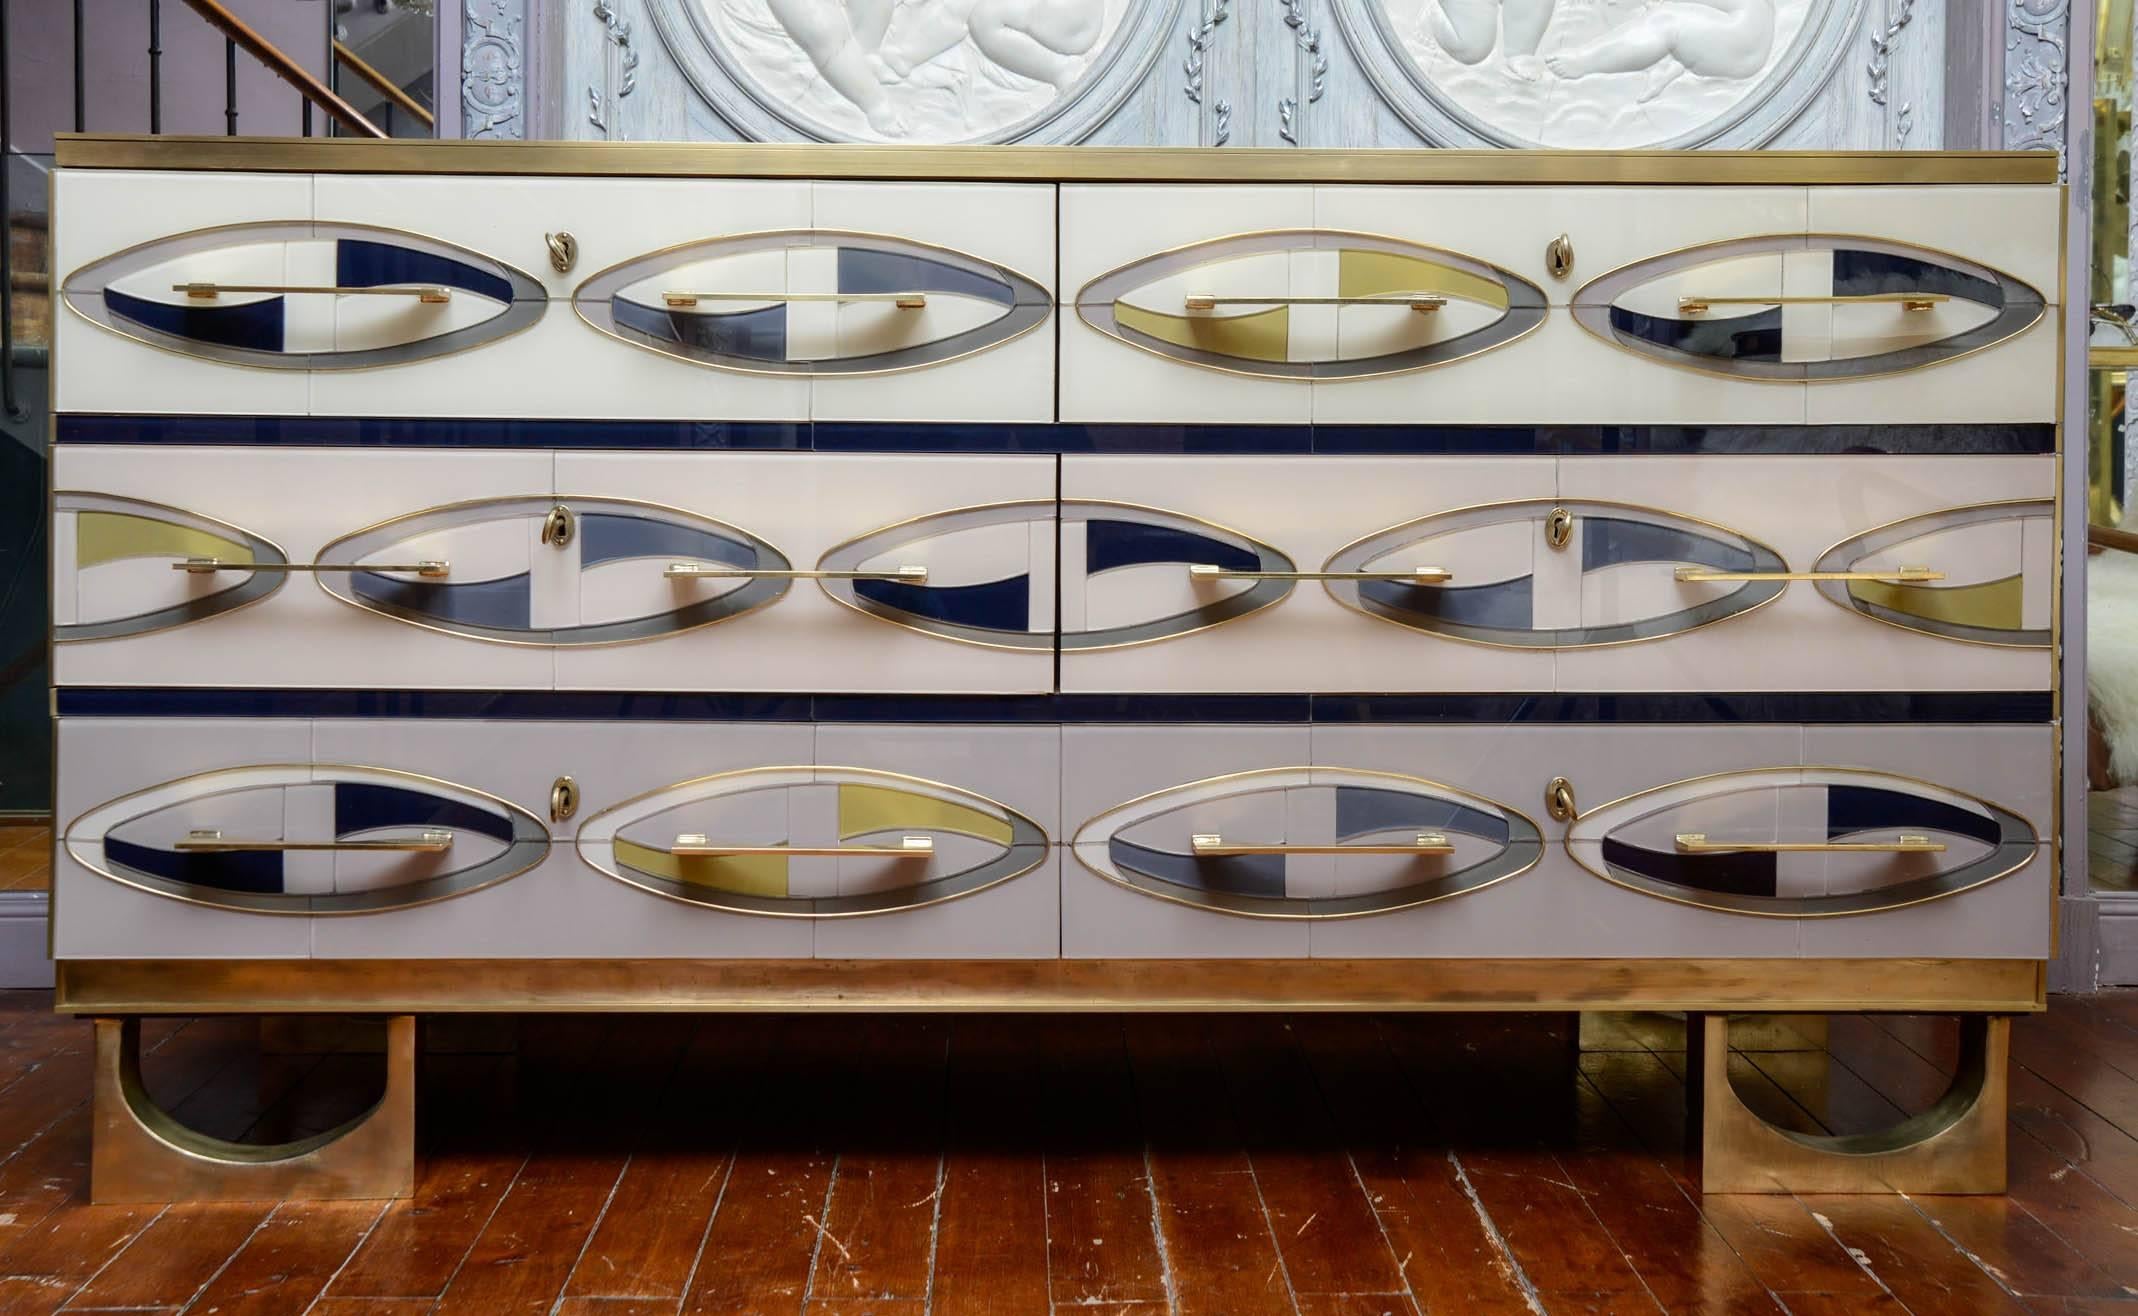 Commode in colored mirror navy blue, ivory, grey and black, six drawers, fillet, handles and legs in brass.